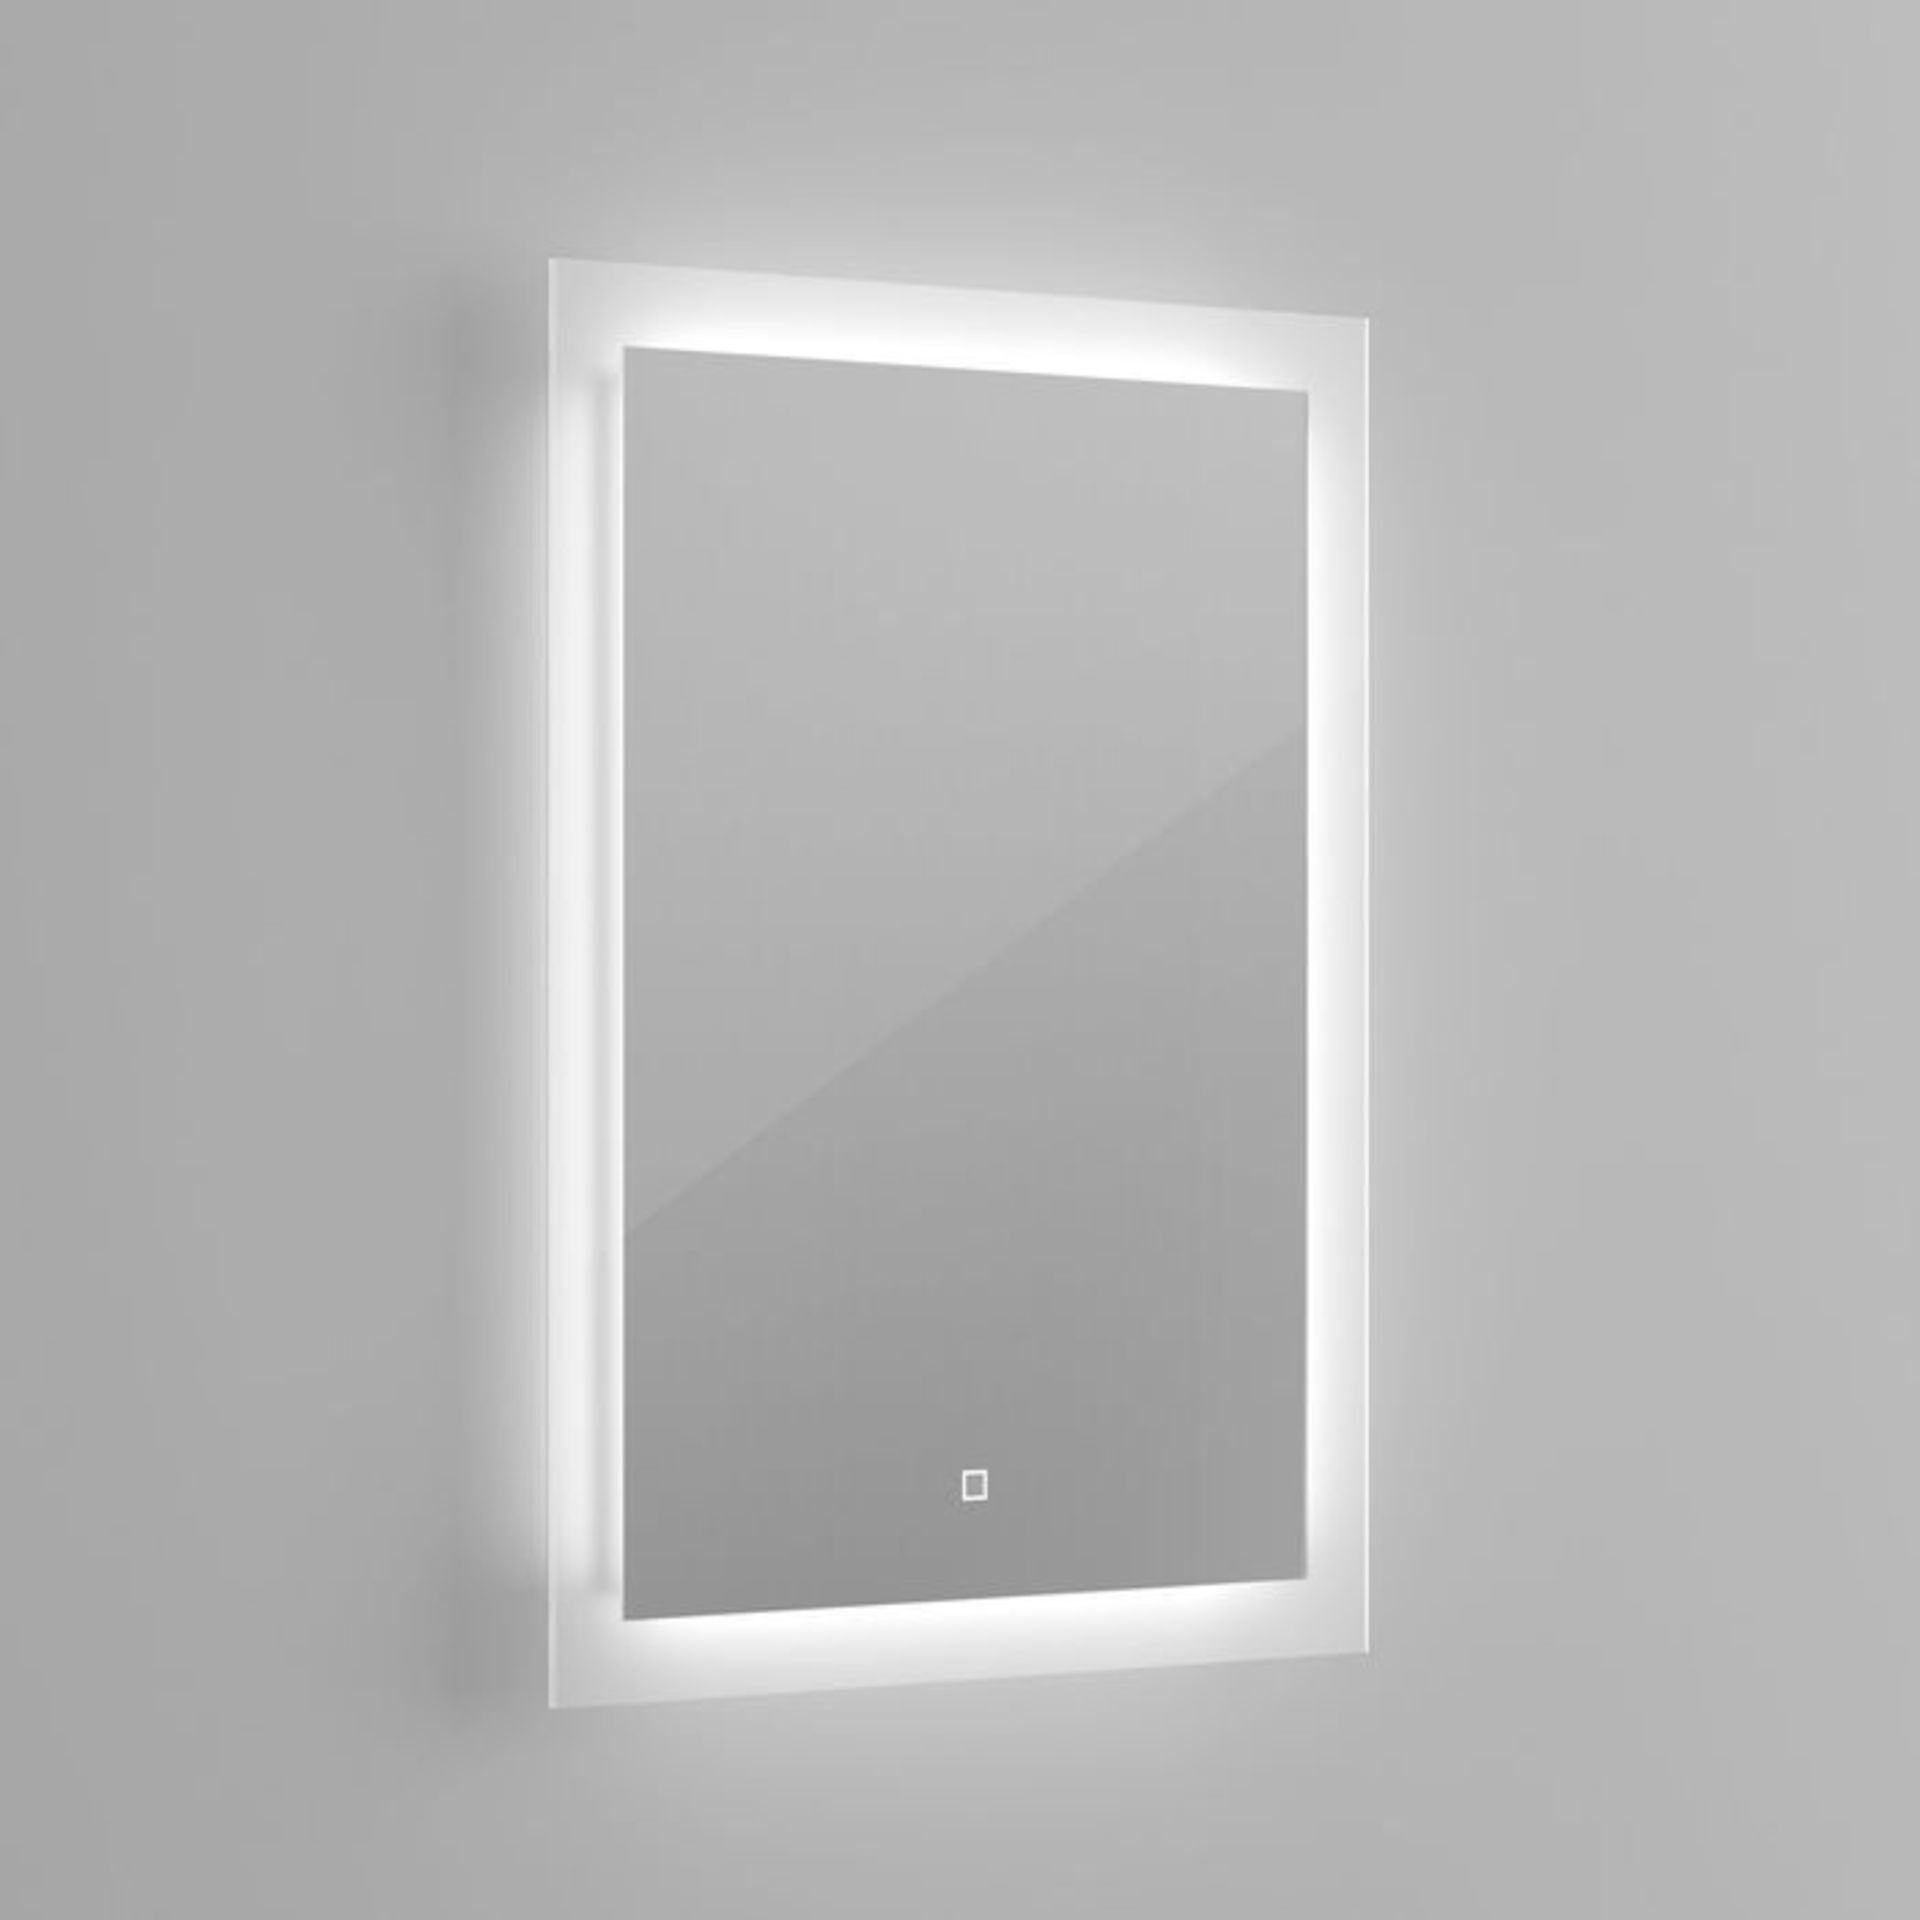 (Y203) 700x500mm Orion Illuminated LED Mirror - Switch Control. RRP £349.99. Energy efficient LED - Image 6 of 6